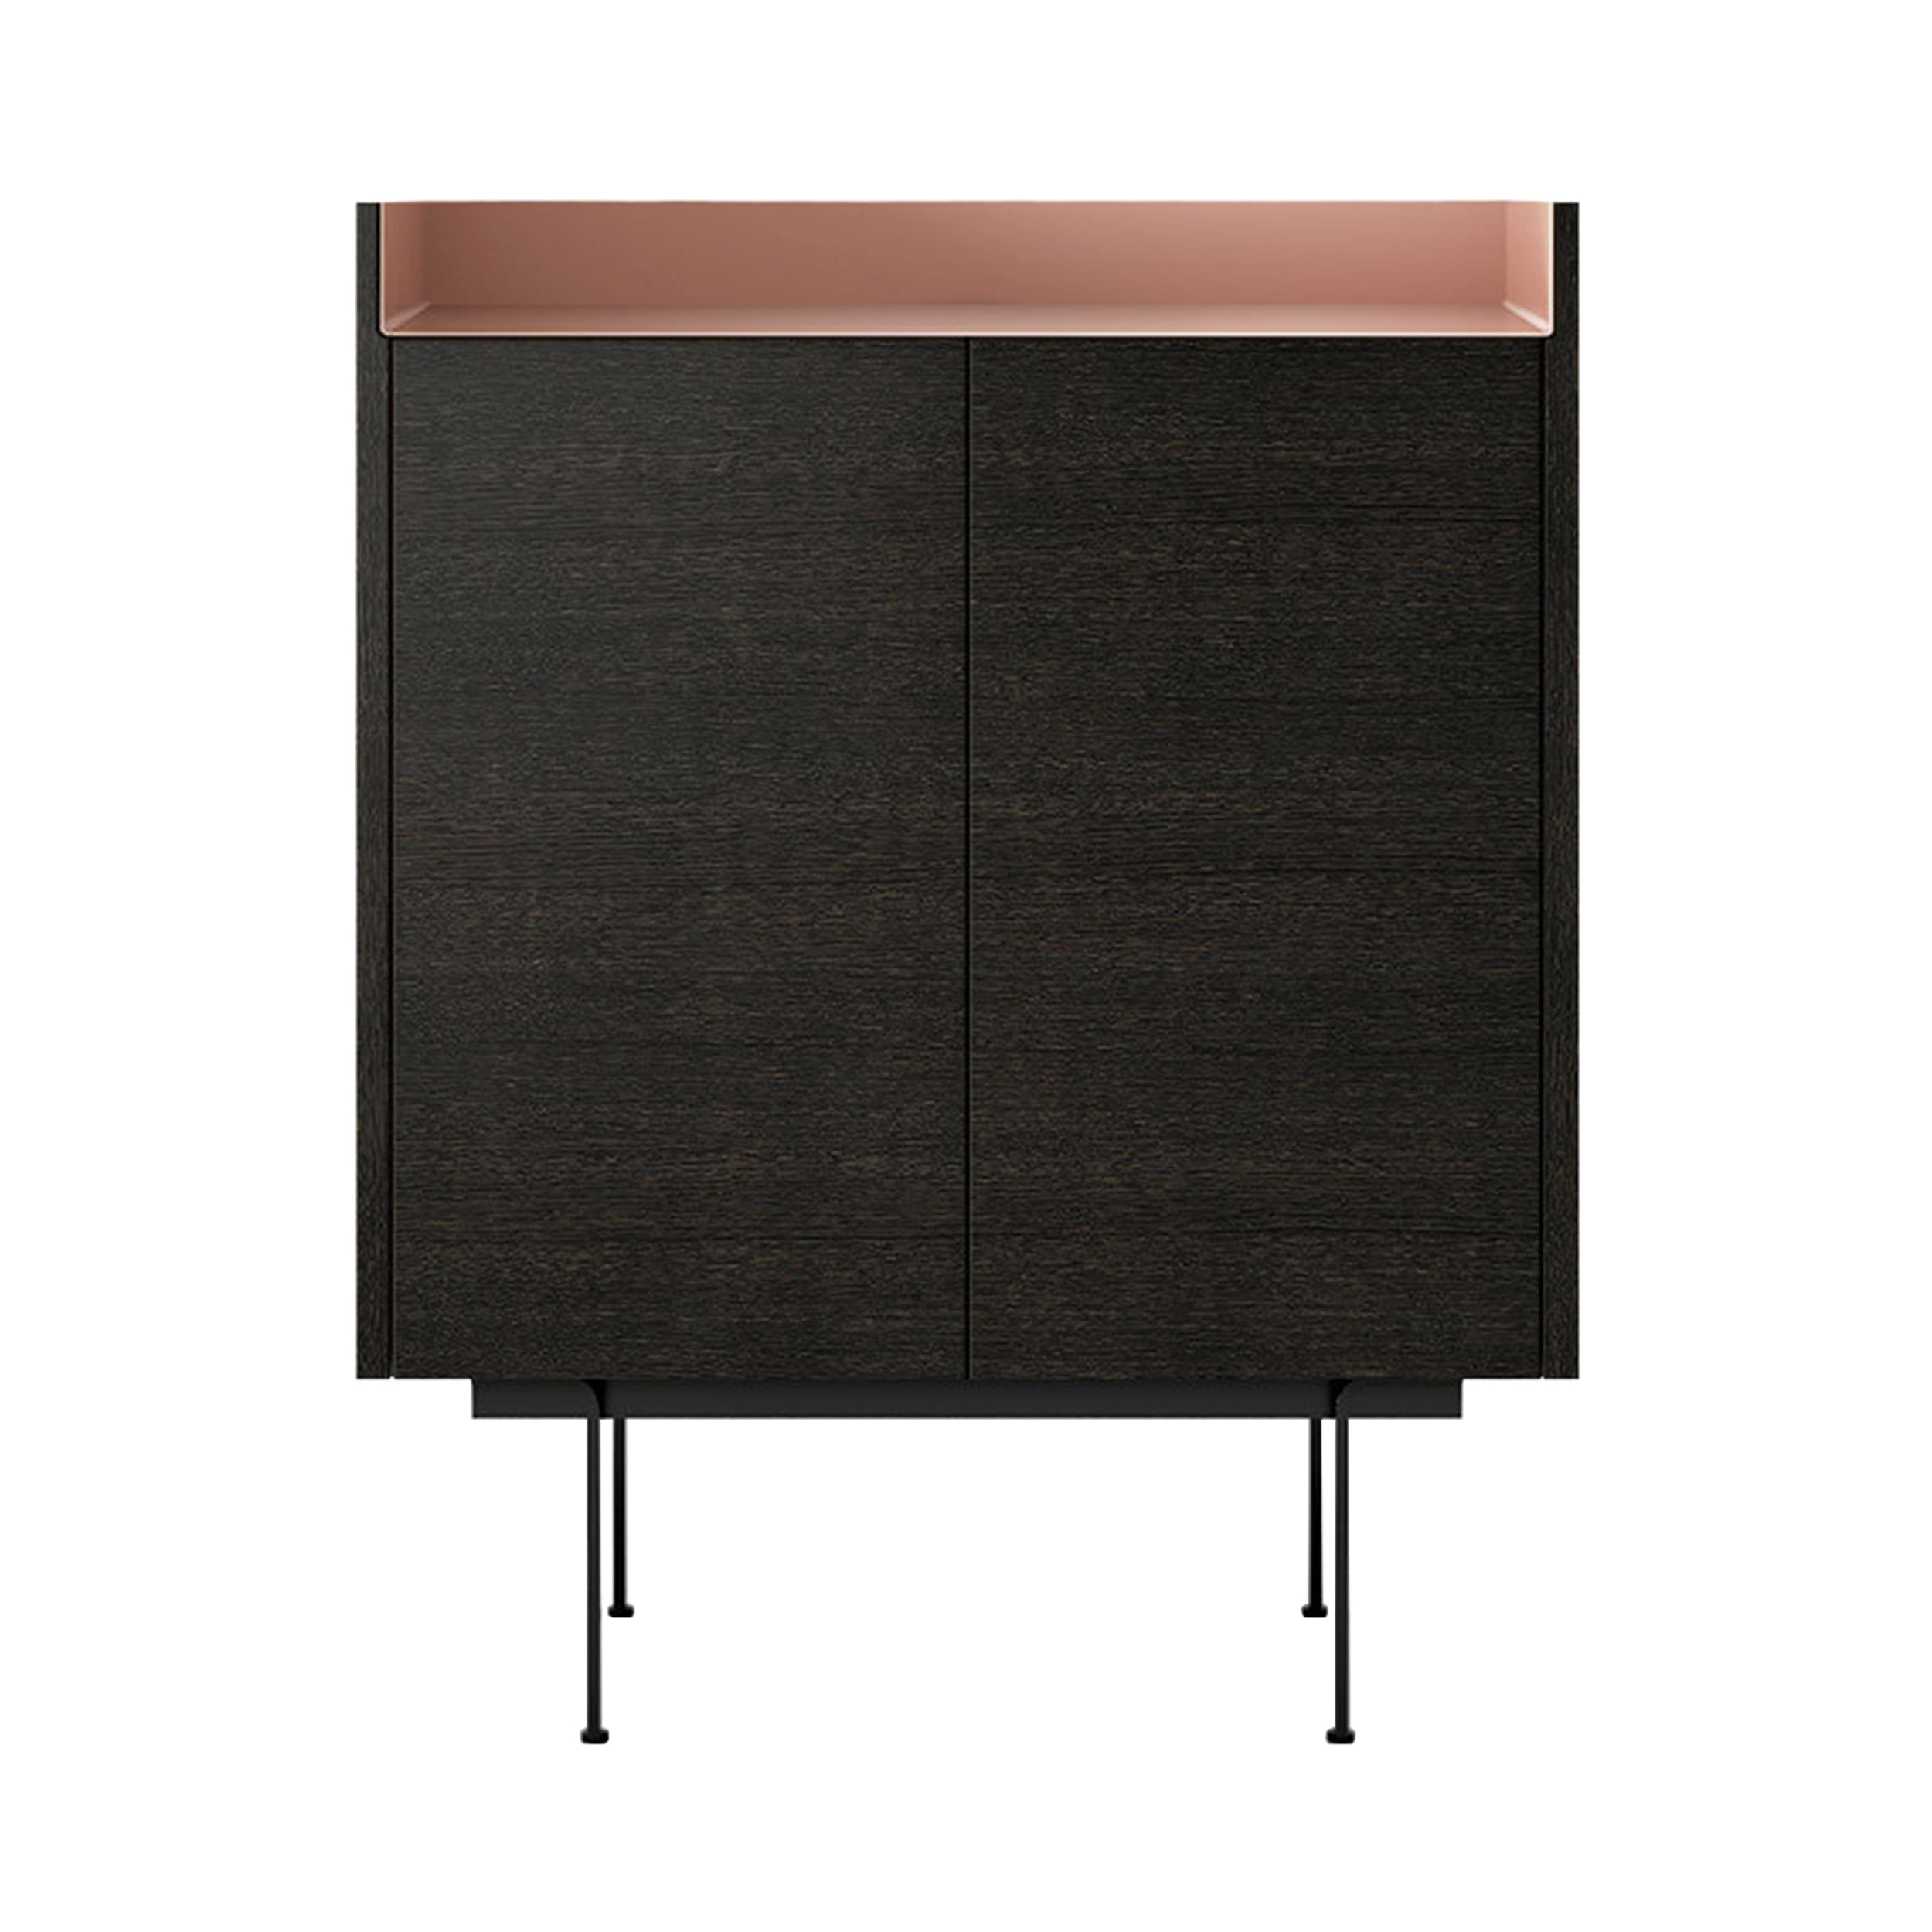 Stockholm Cupboard: STH244 + Dark Grey Stained Oak + Anodized Aluminum Pale Rose + Black